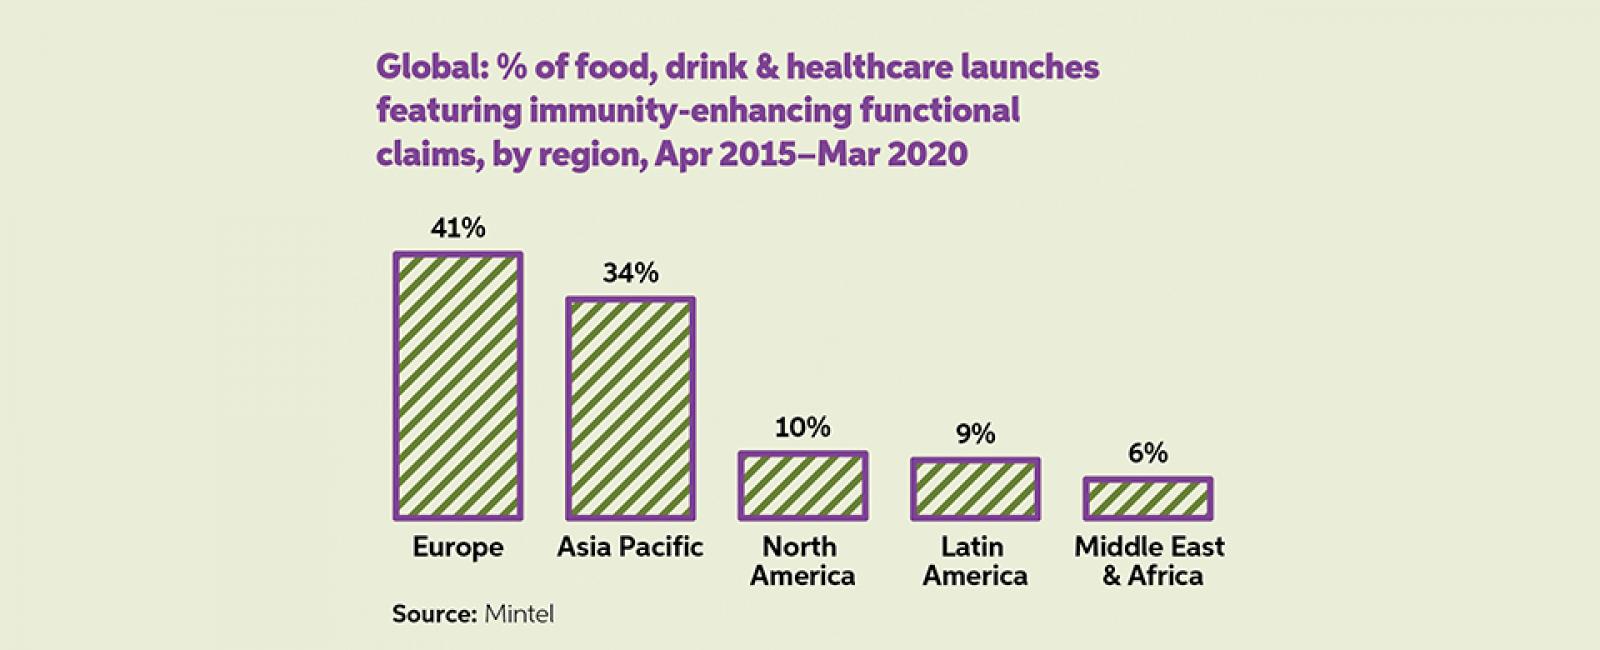 chart showing food, drink & healthcare launches with immunity enhancing functional claims per market